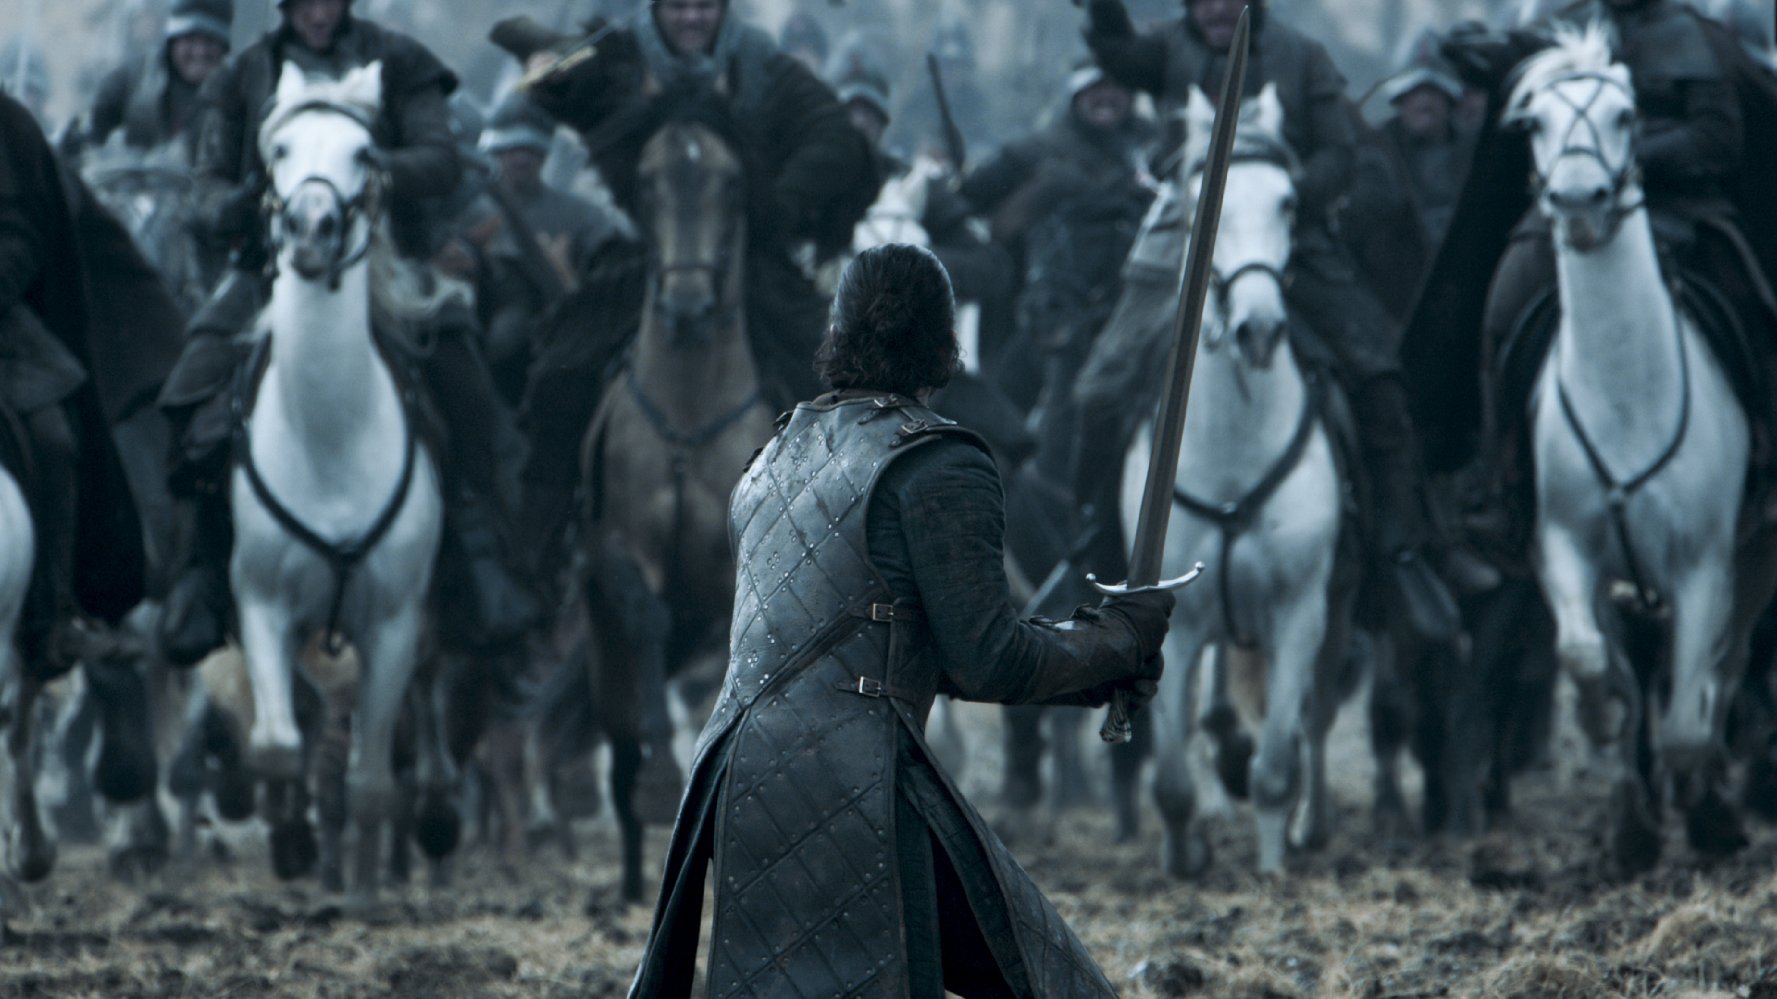 Game Of Thrones 4 image 002